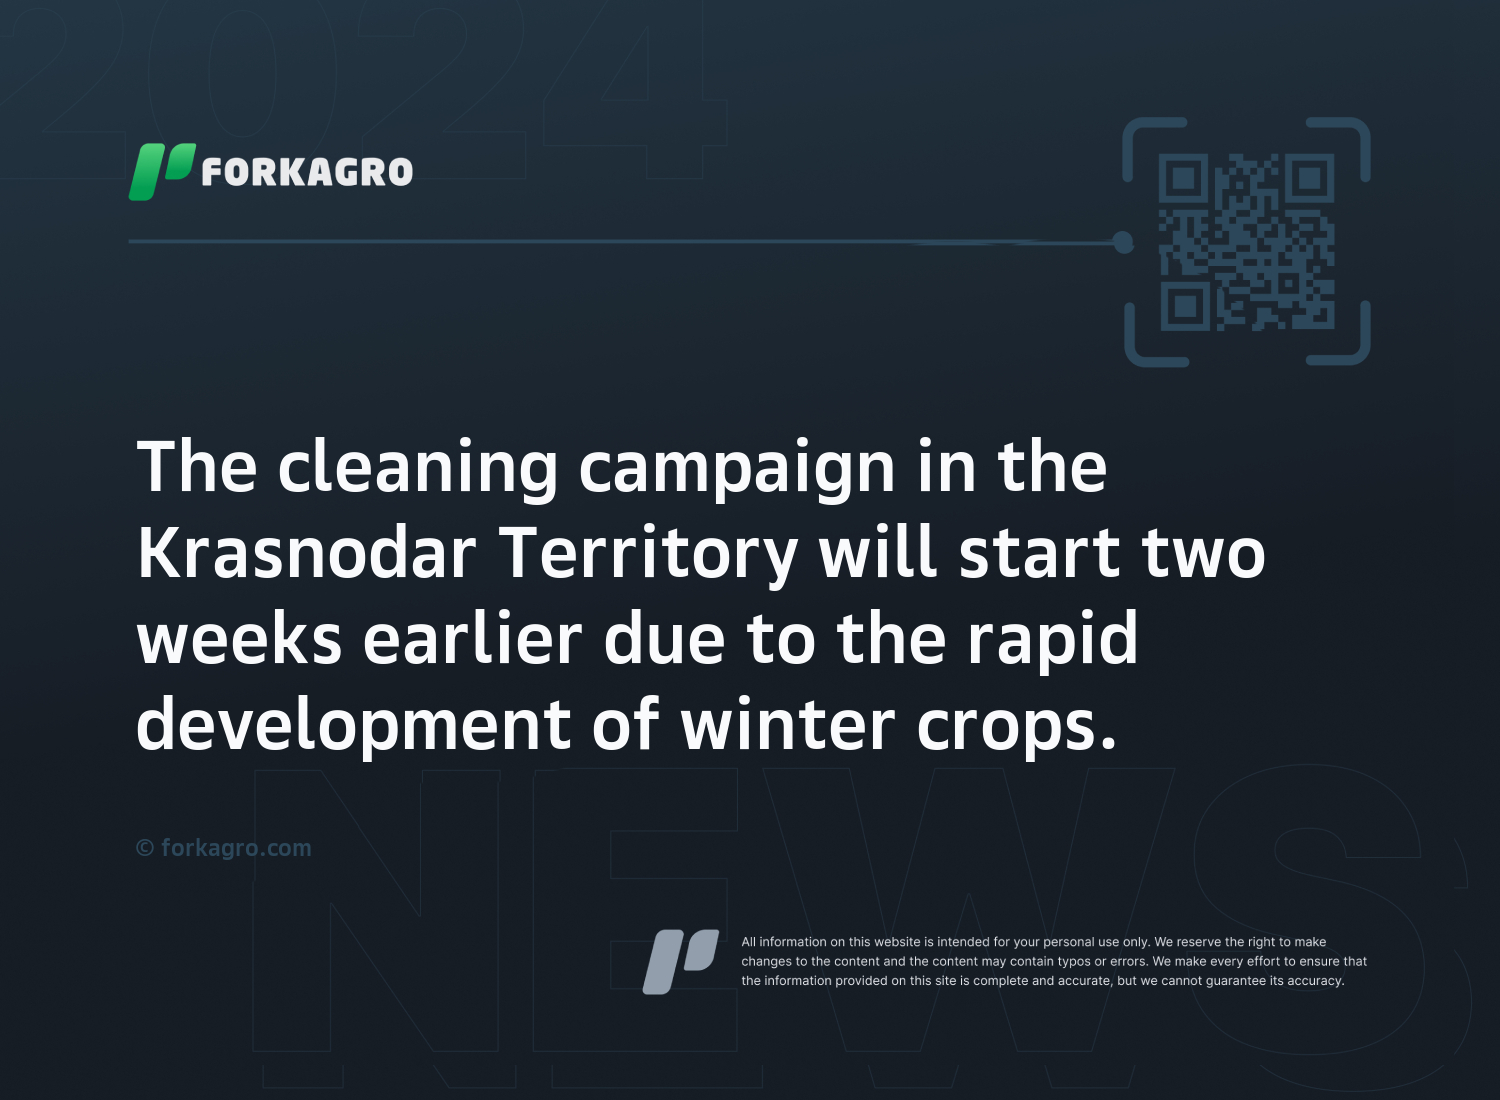 The cleaning campaign in the Krasnodar Territory will start two weeks earlier due to the rapid development of winter crops.